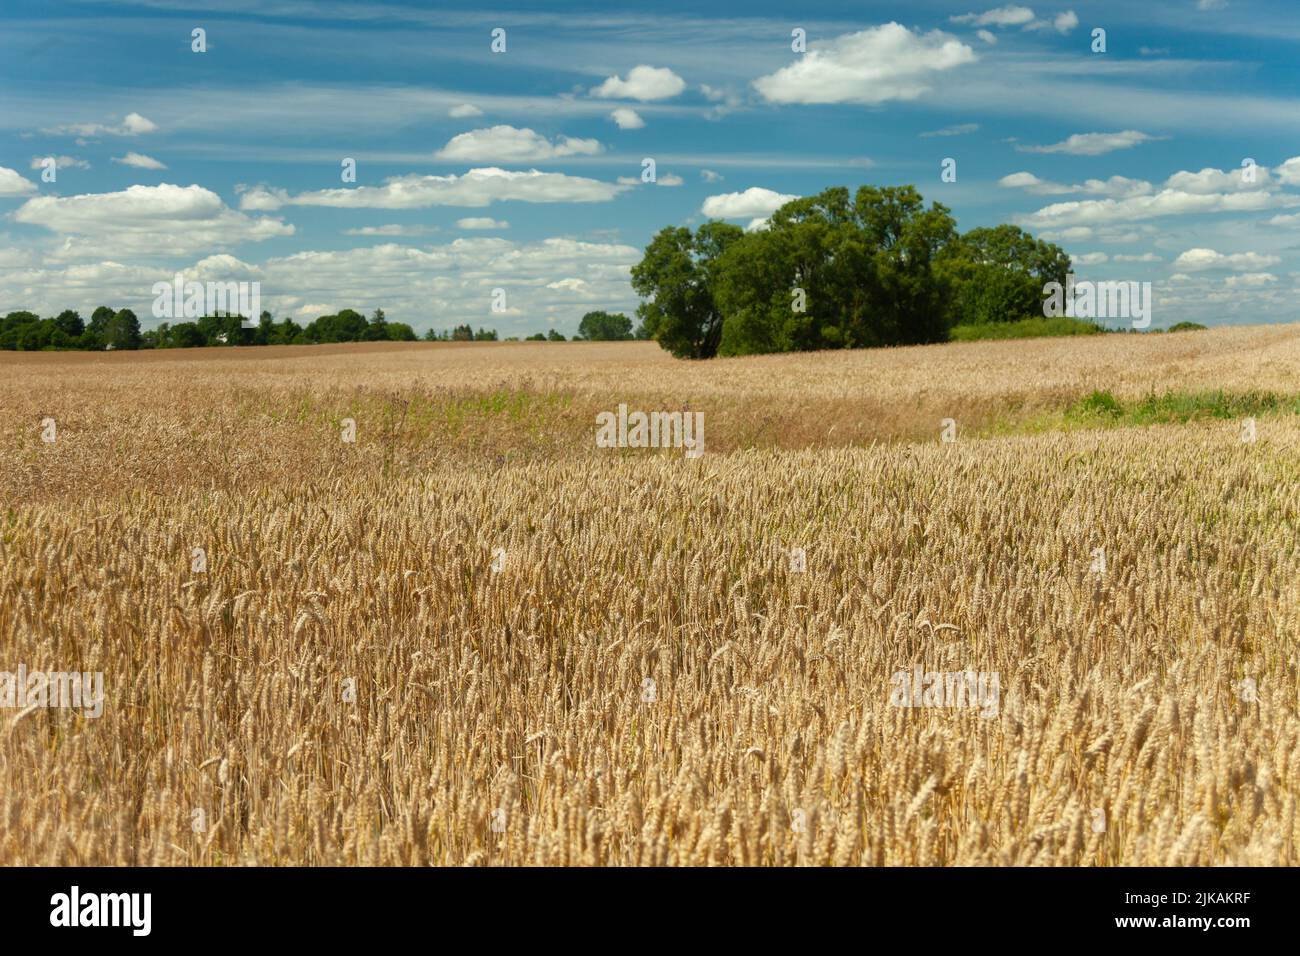 Green trees behind a wheat field and a blue sky, summer rural view Stock Photo